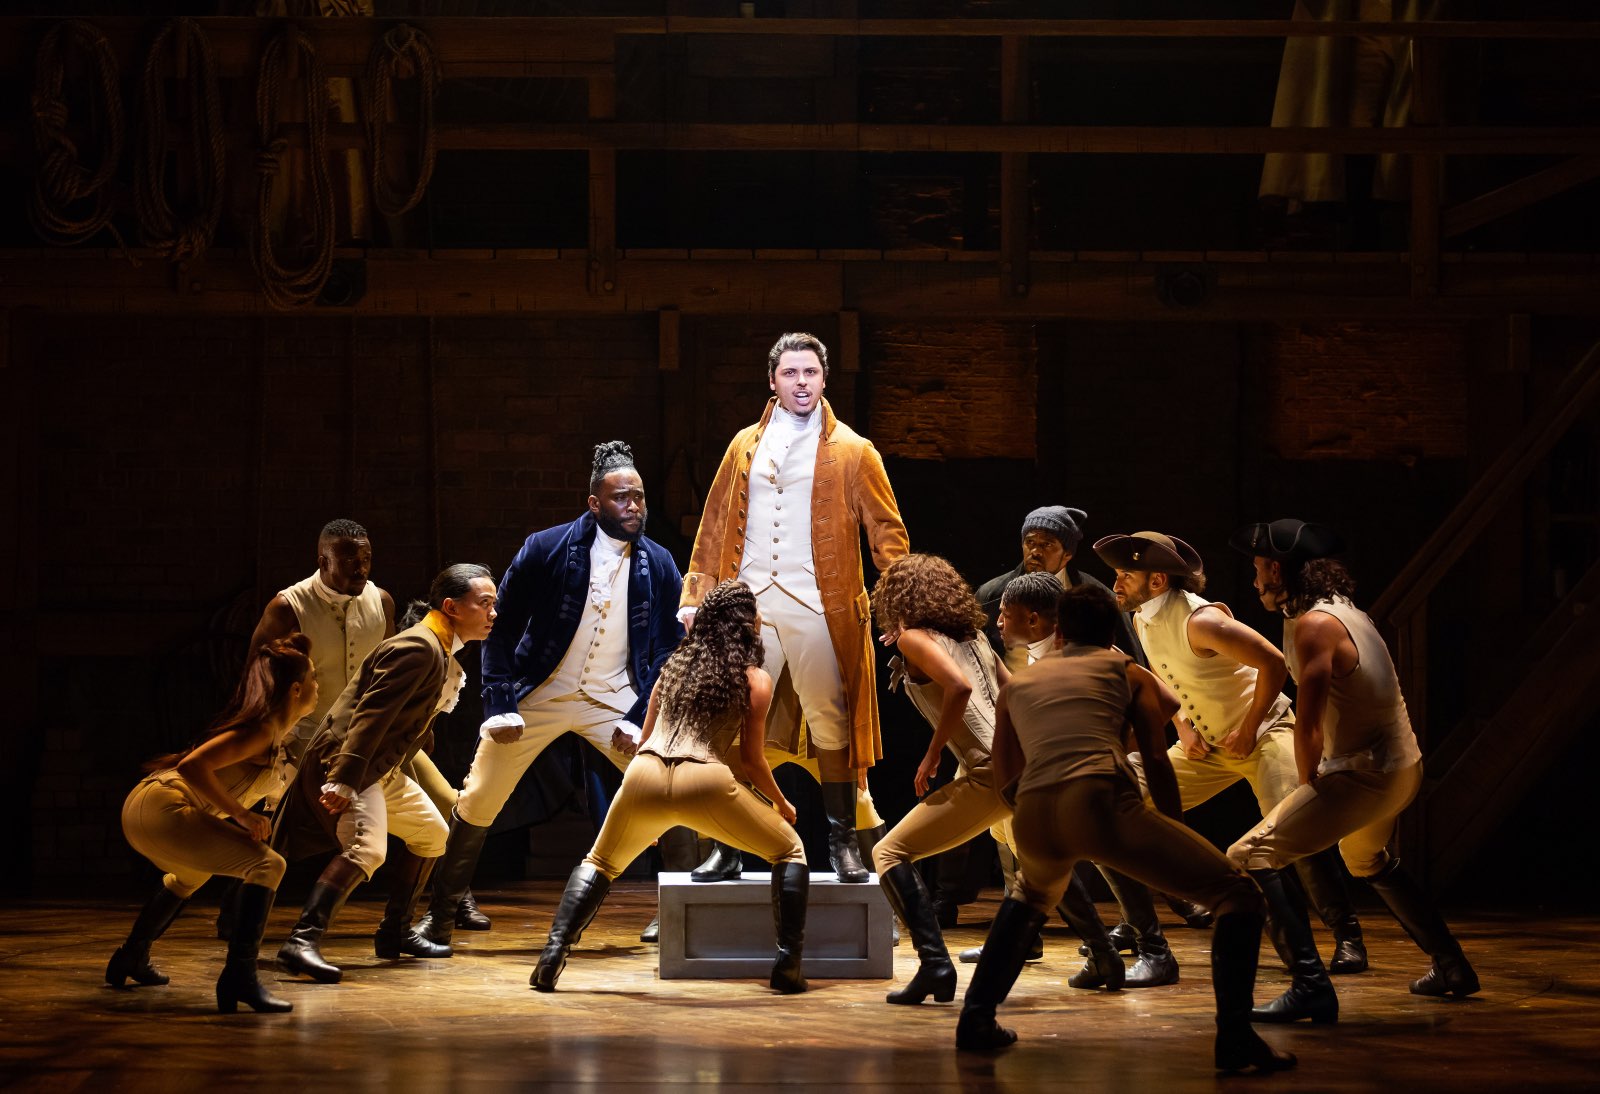 Acclaimed Broadway musical 'Hamilton' set for Singapore premiere in